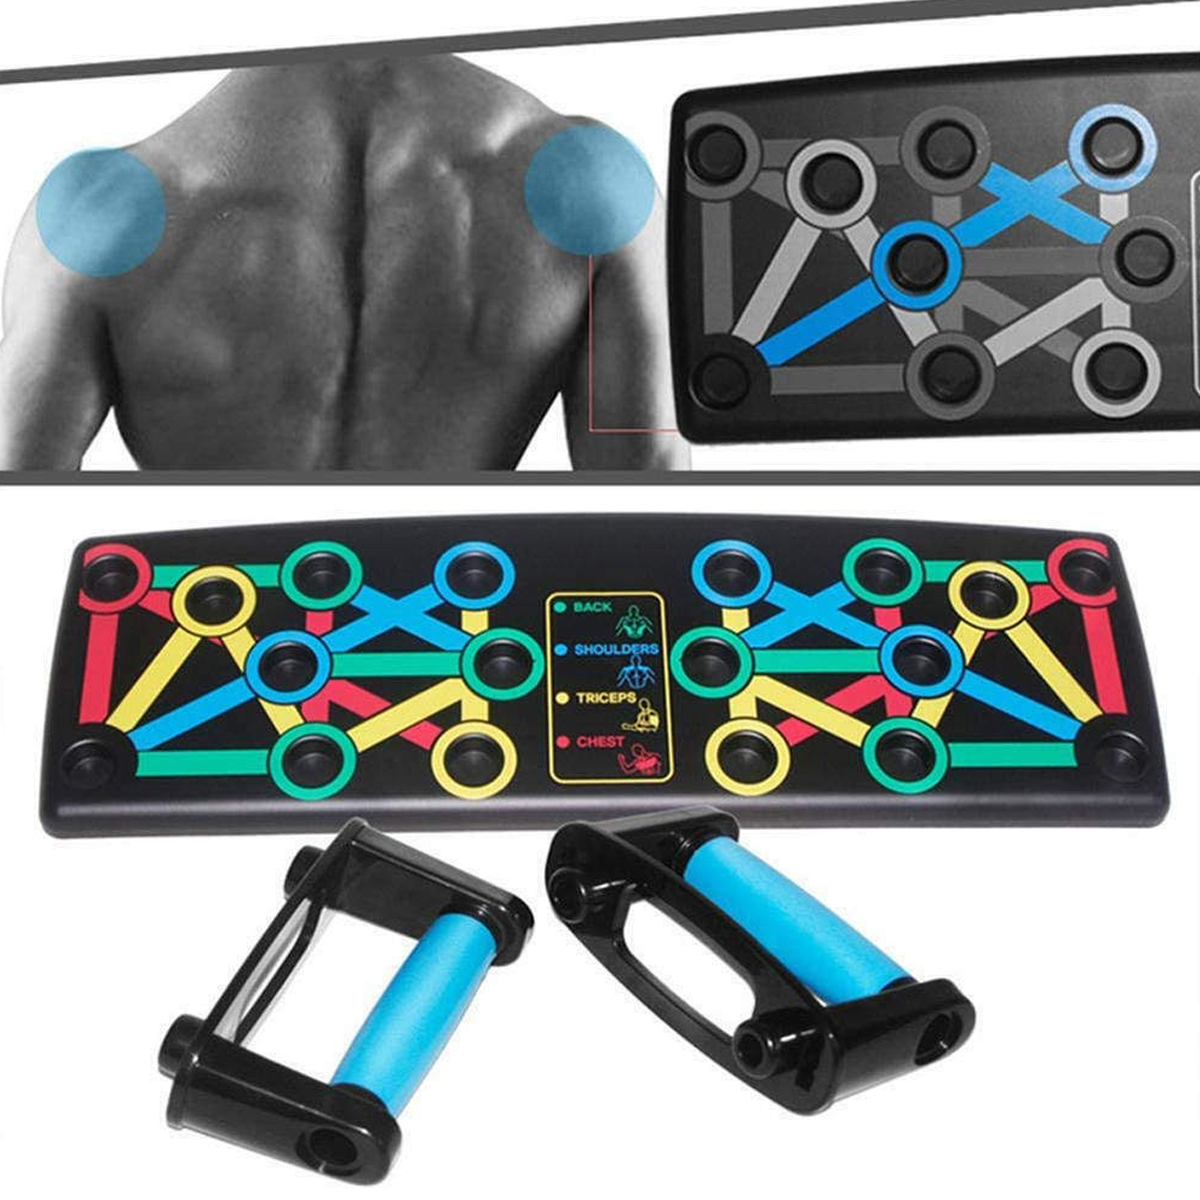 14-In-1-Foldable-Push-Up-Stand-Board-Home-Gym-Push-up-Chest-Muscle-Training-Fitness-Equipment-1667691-5